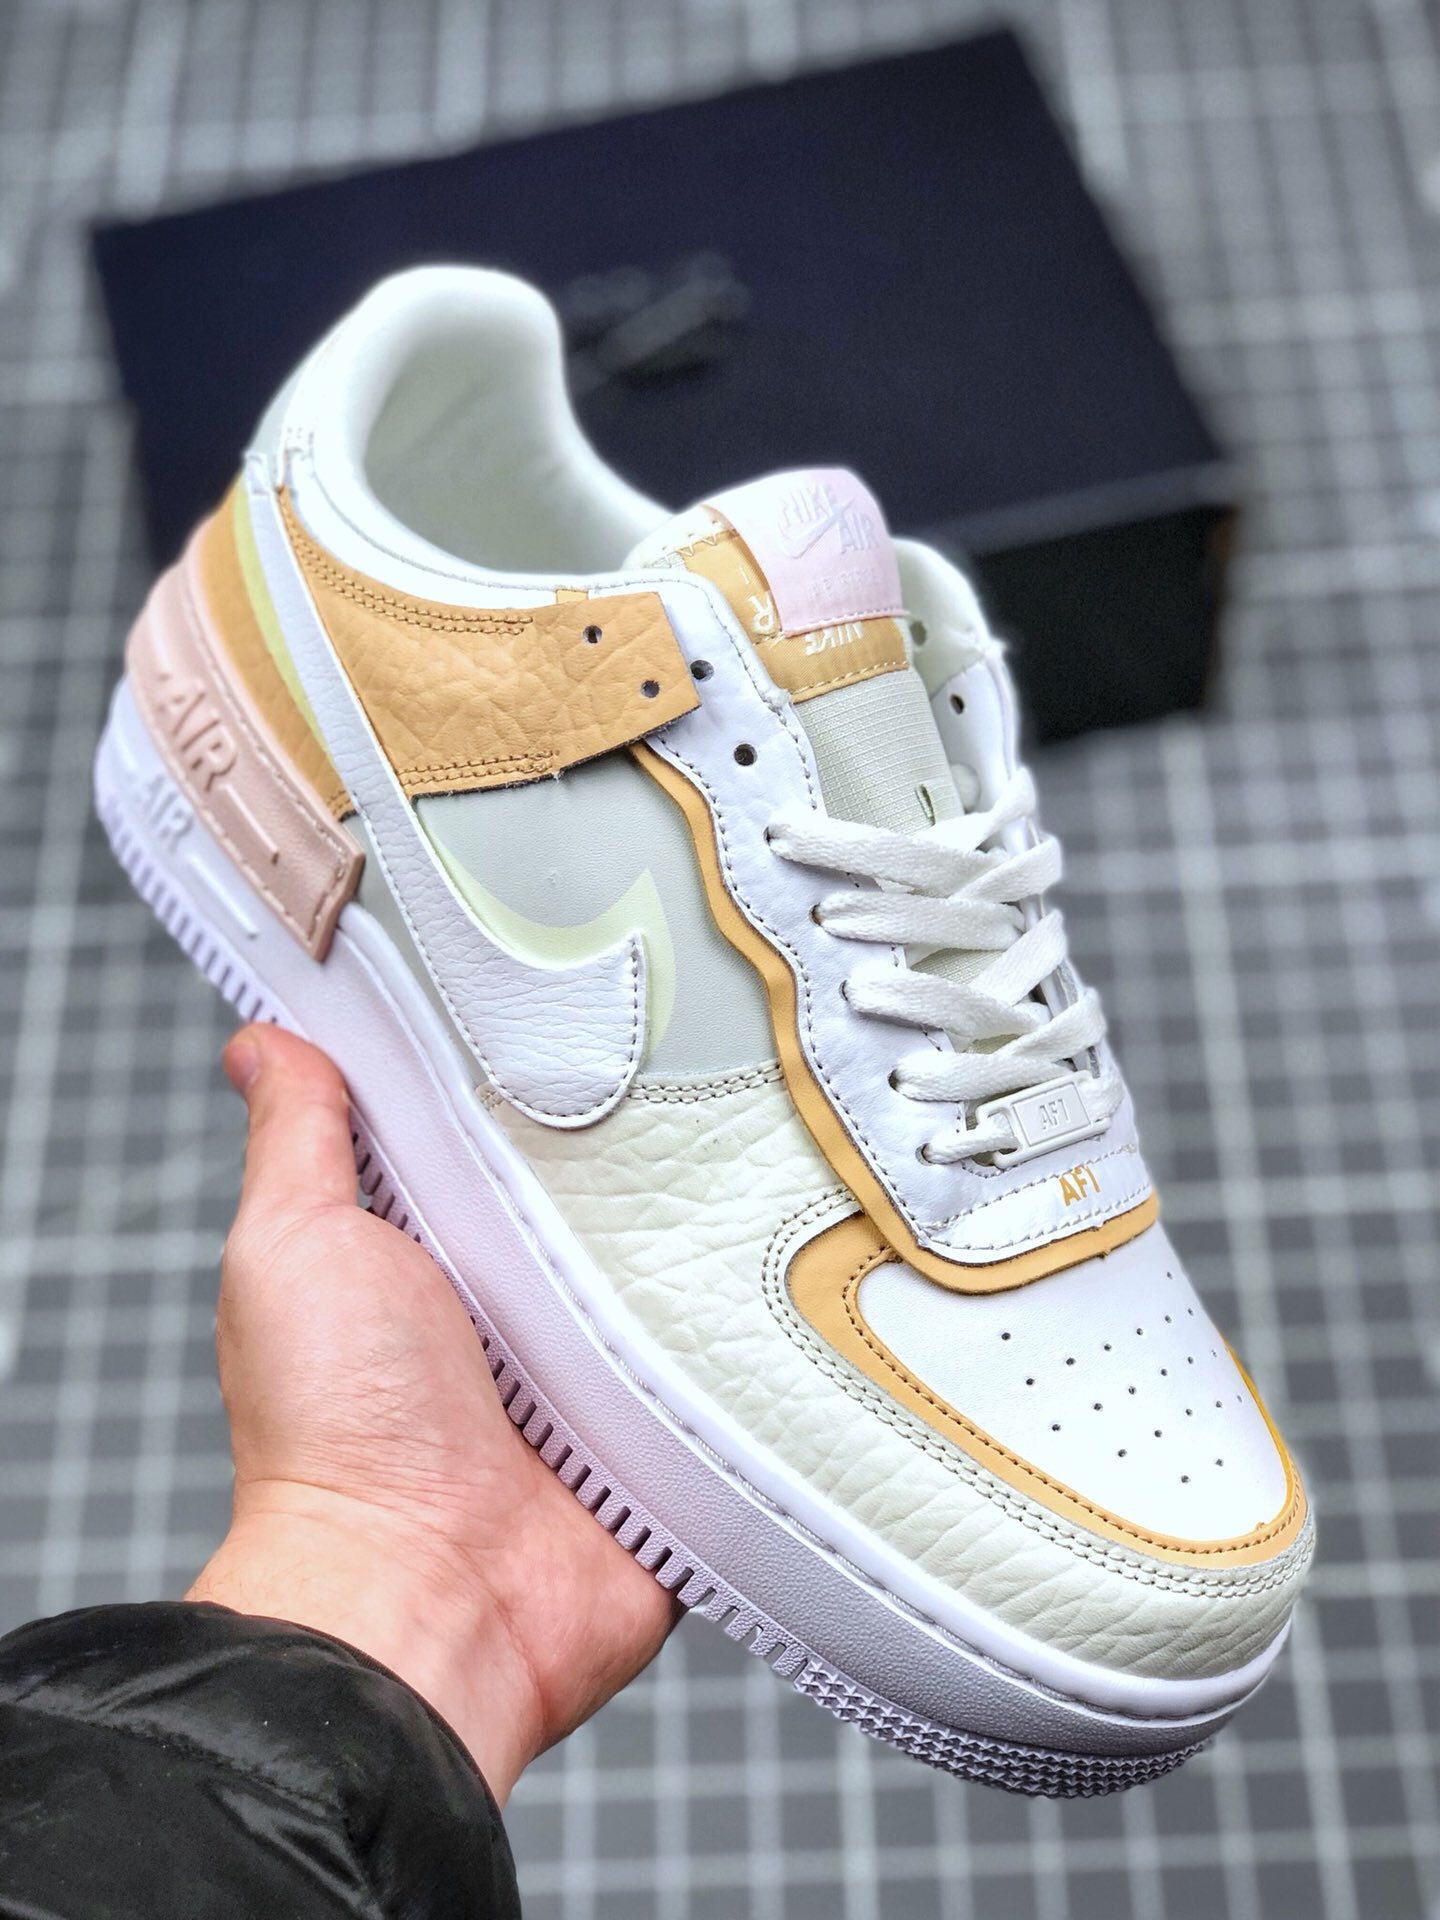 Nike Air Force 1 Shadow in “Spruce Aura/Sail” For Sale – Sneaker Hello السا وانا